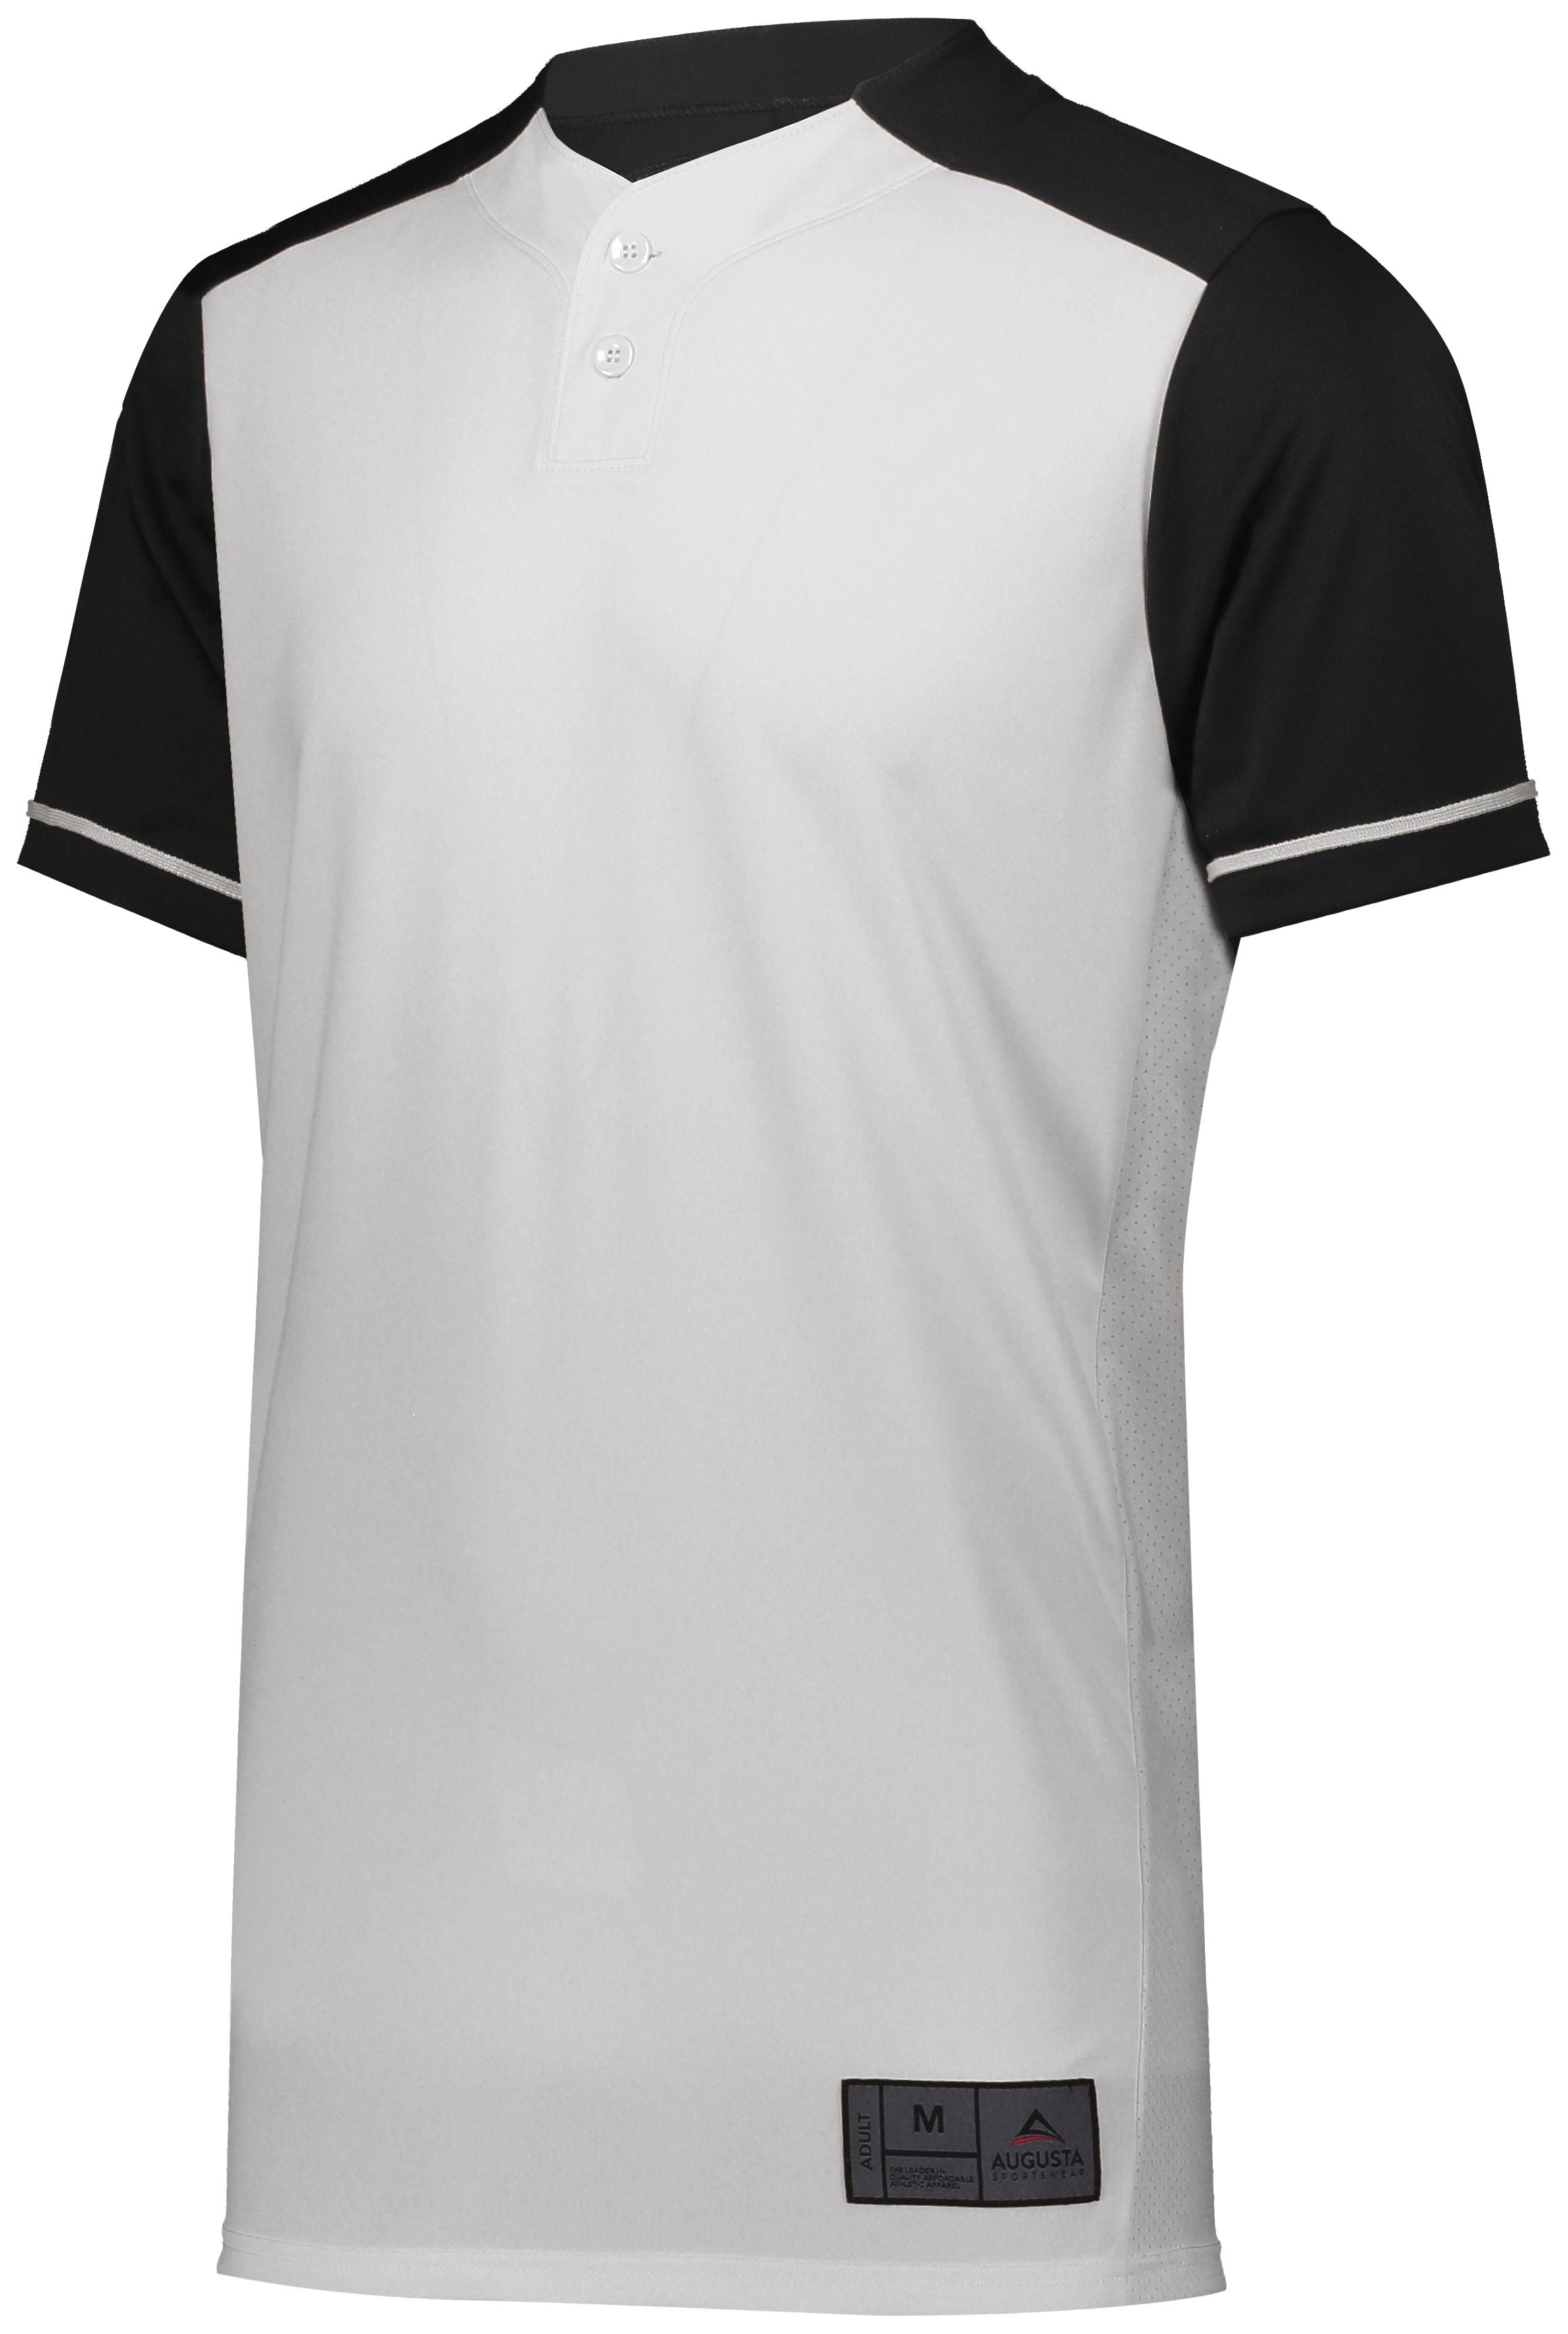 Augusta Sportswear Closer Jersey in White/Black  -Part of the Adult, Adult-Jersey, Augusta-Products, Baseball, Shirts, All-Sports, All-Sports-1 product lines at KanaleyCreations.com